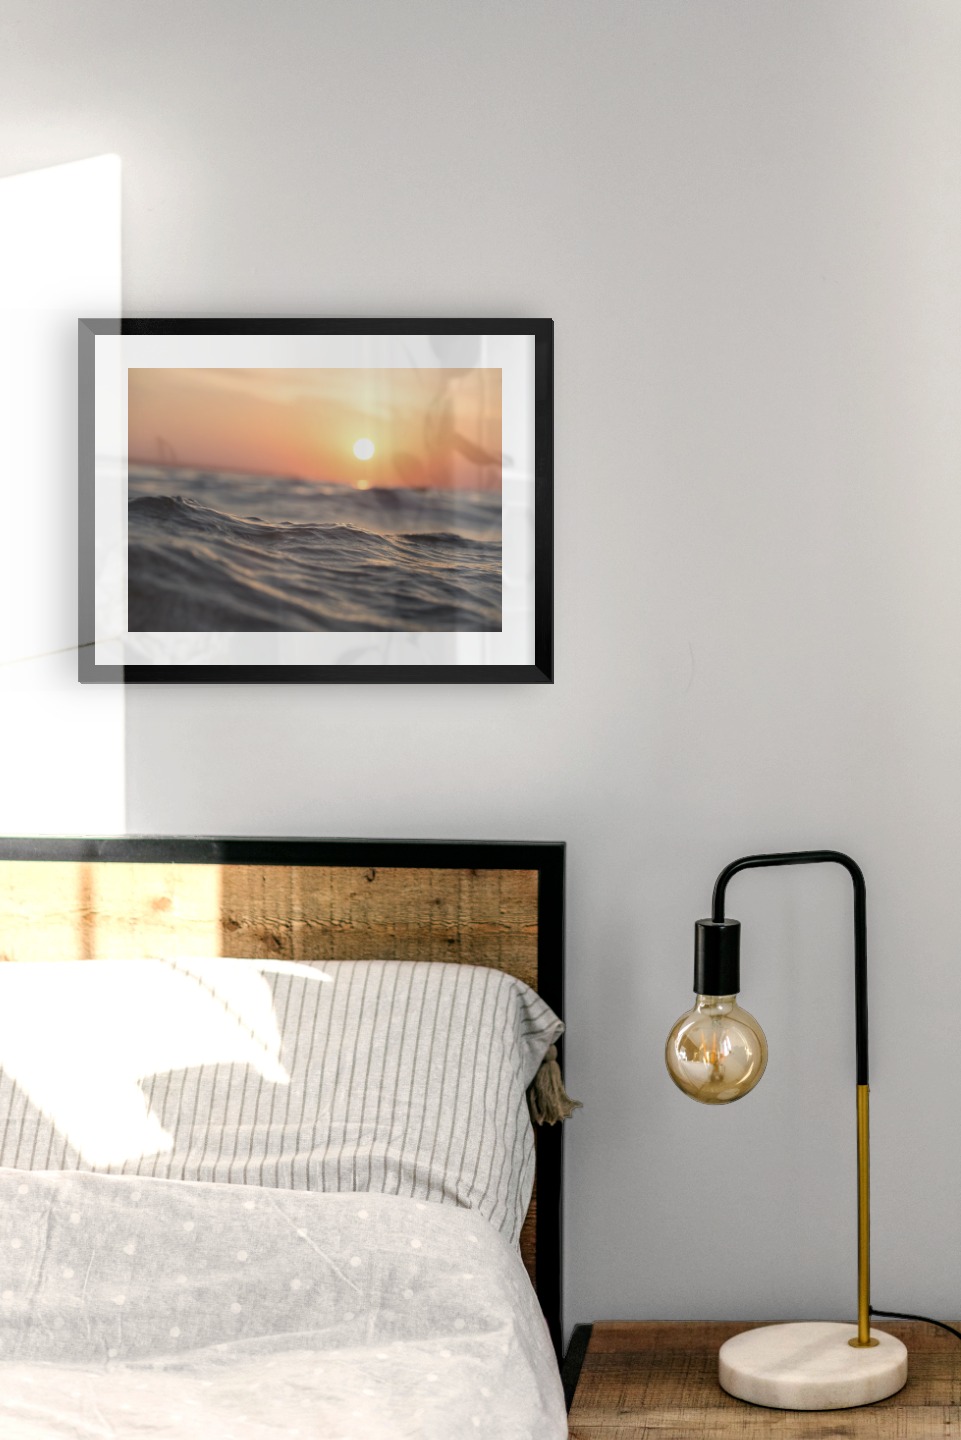 Gallery wall with picture frame in black in size 30x40 with print "Waves and the sun"